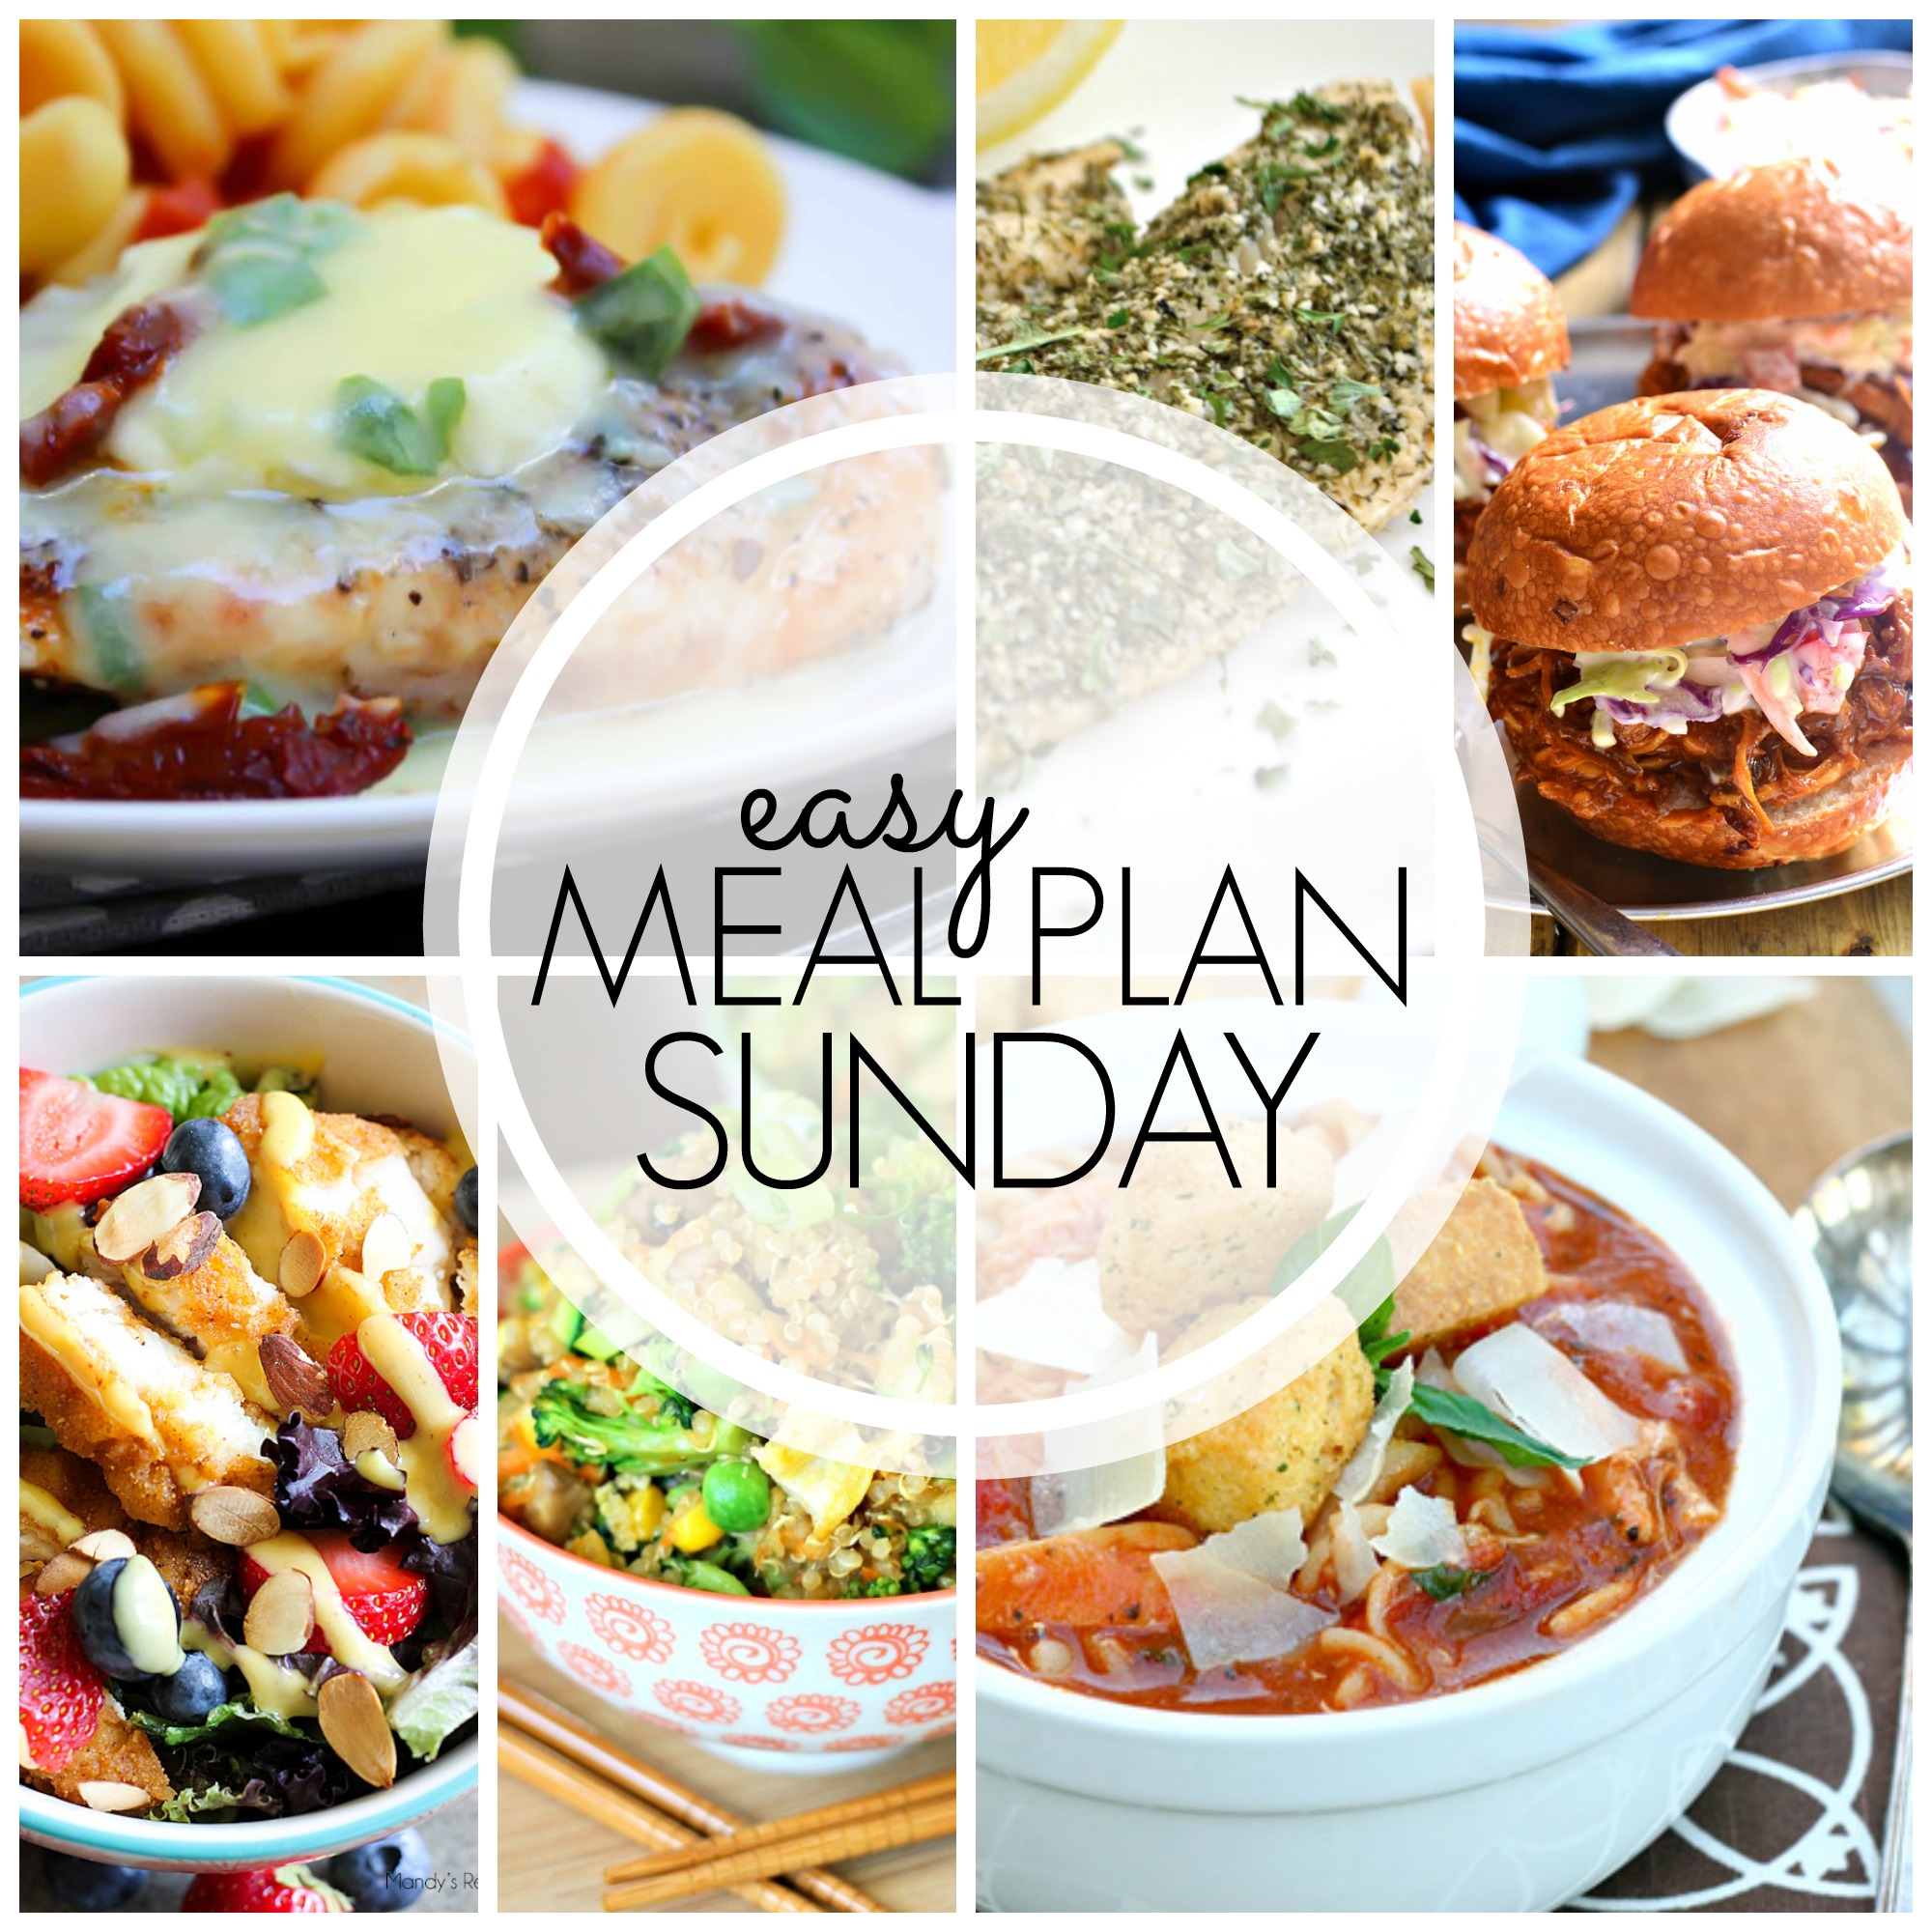 Easy Meal Plan Sunday #64